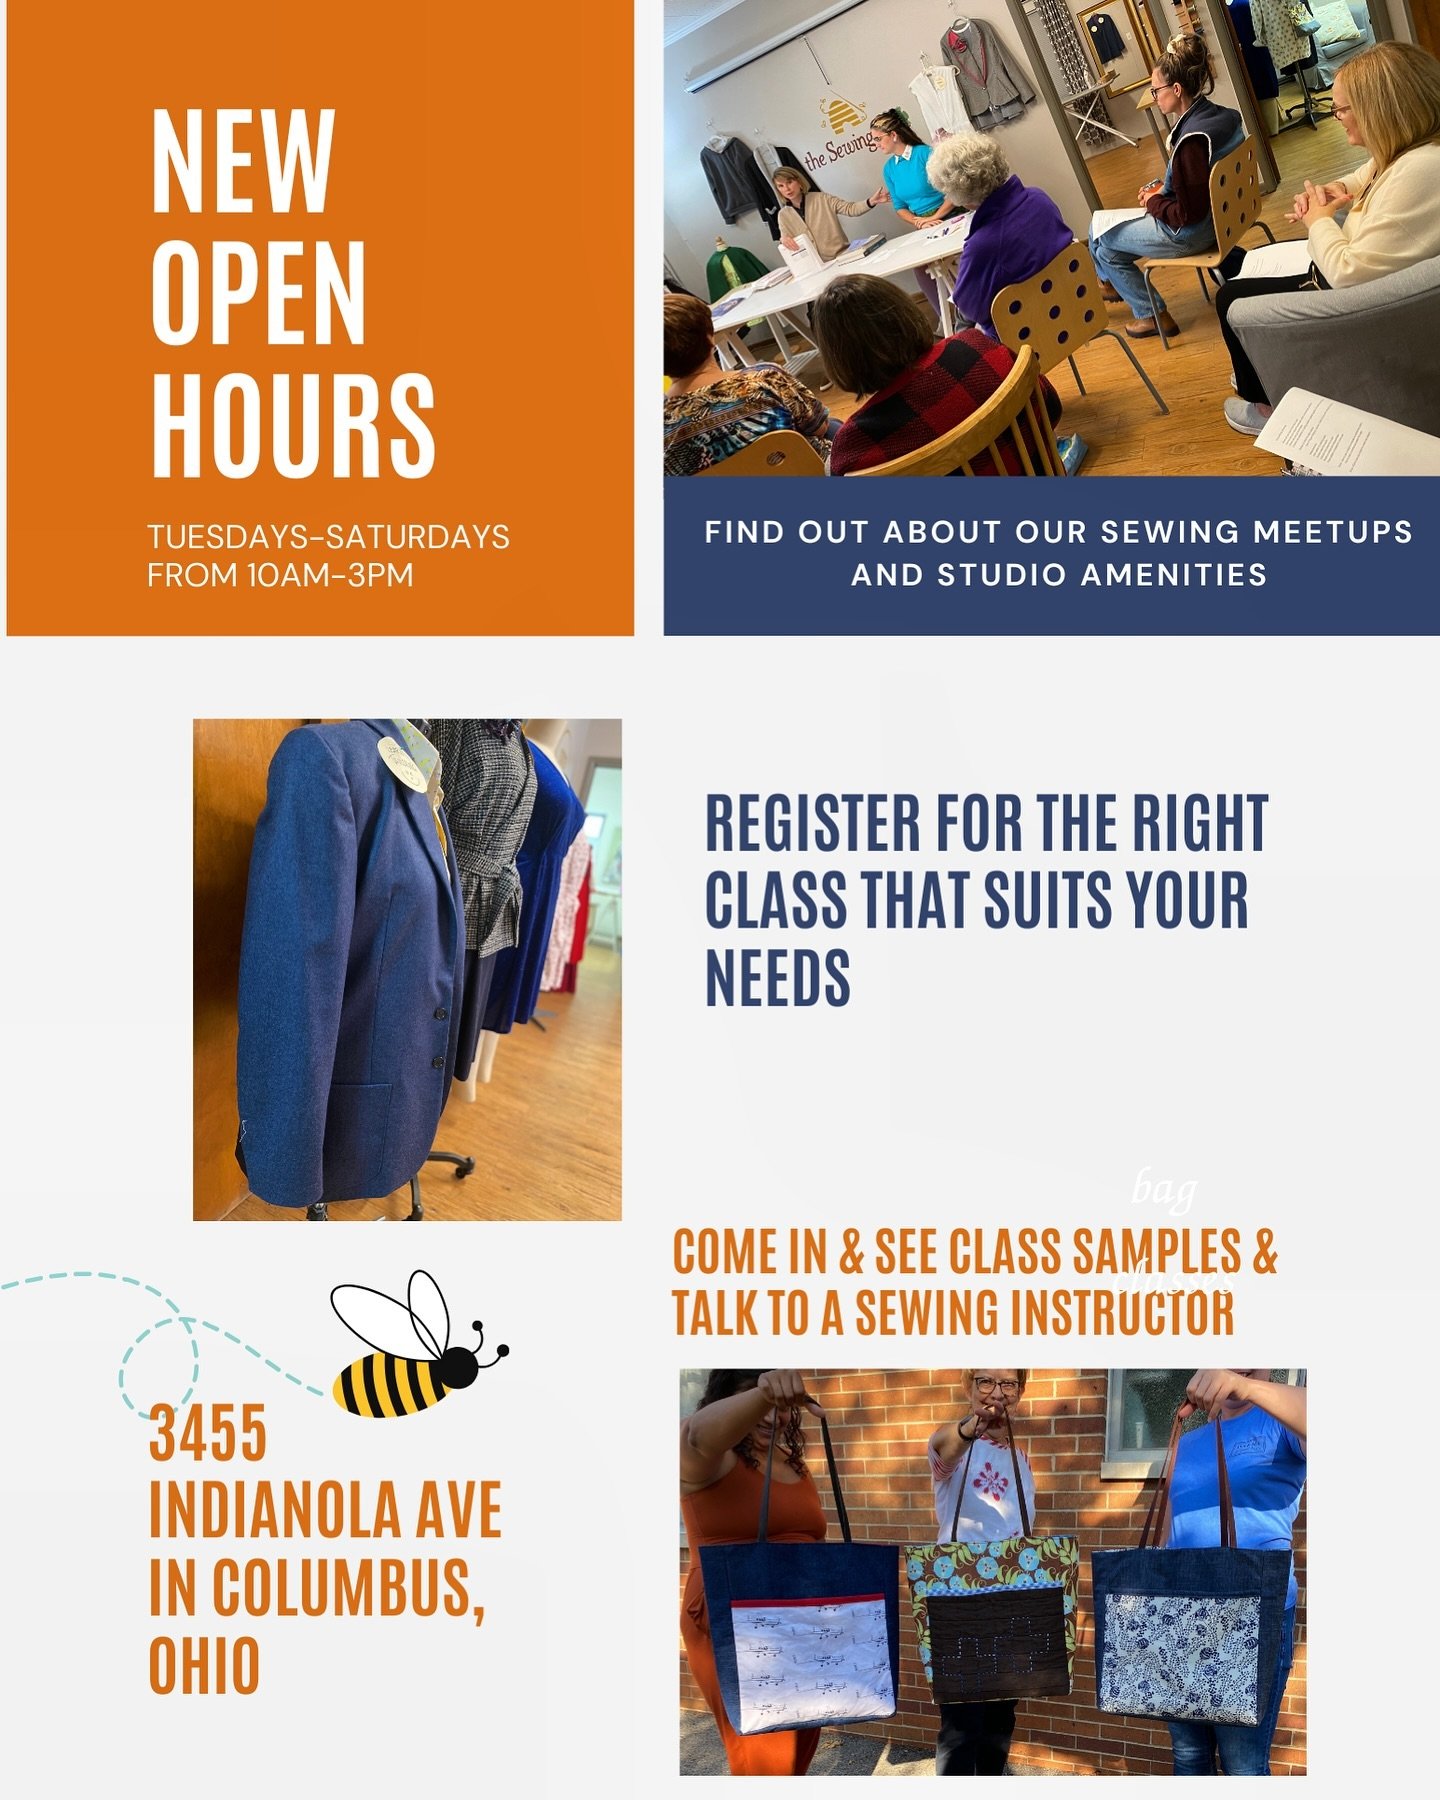 Tuesdays through Saturdays from 10am-3pm! Come and see samples, talk to a teacher, book a class or show us what you made! #sewingclasses #sewingincolumbusohio #sewingisgrowing #sewingschool #sewinglessonsnearme #learnalifeskill